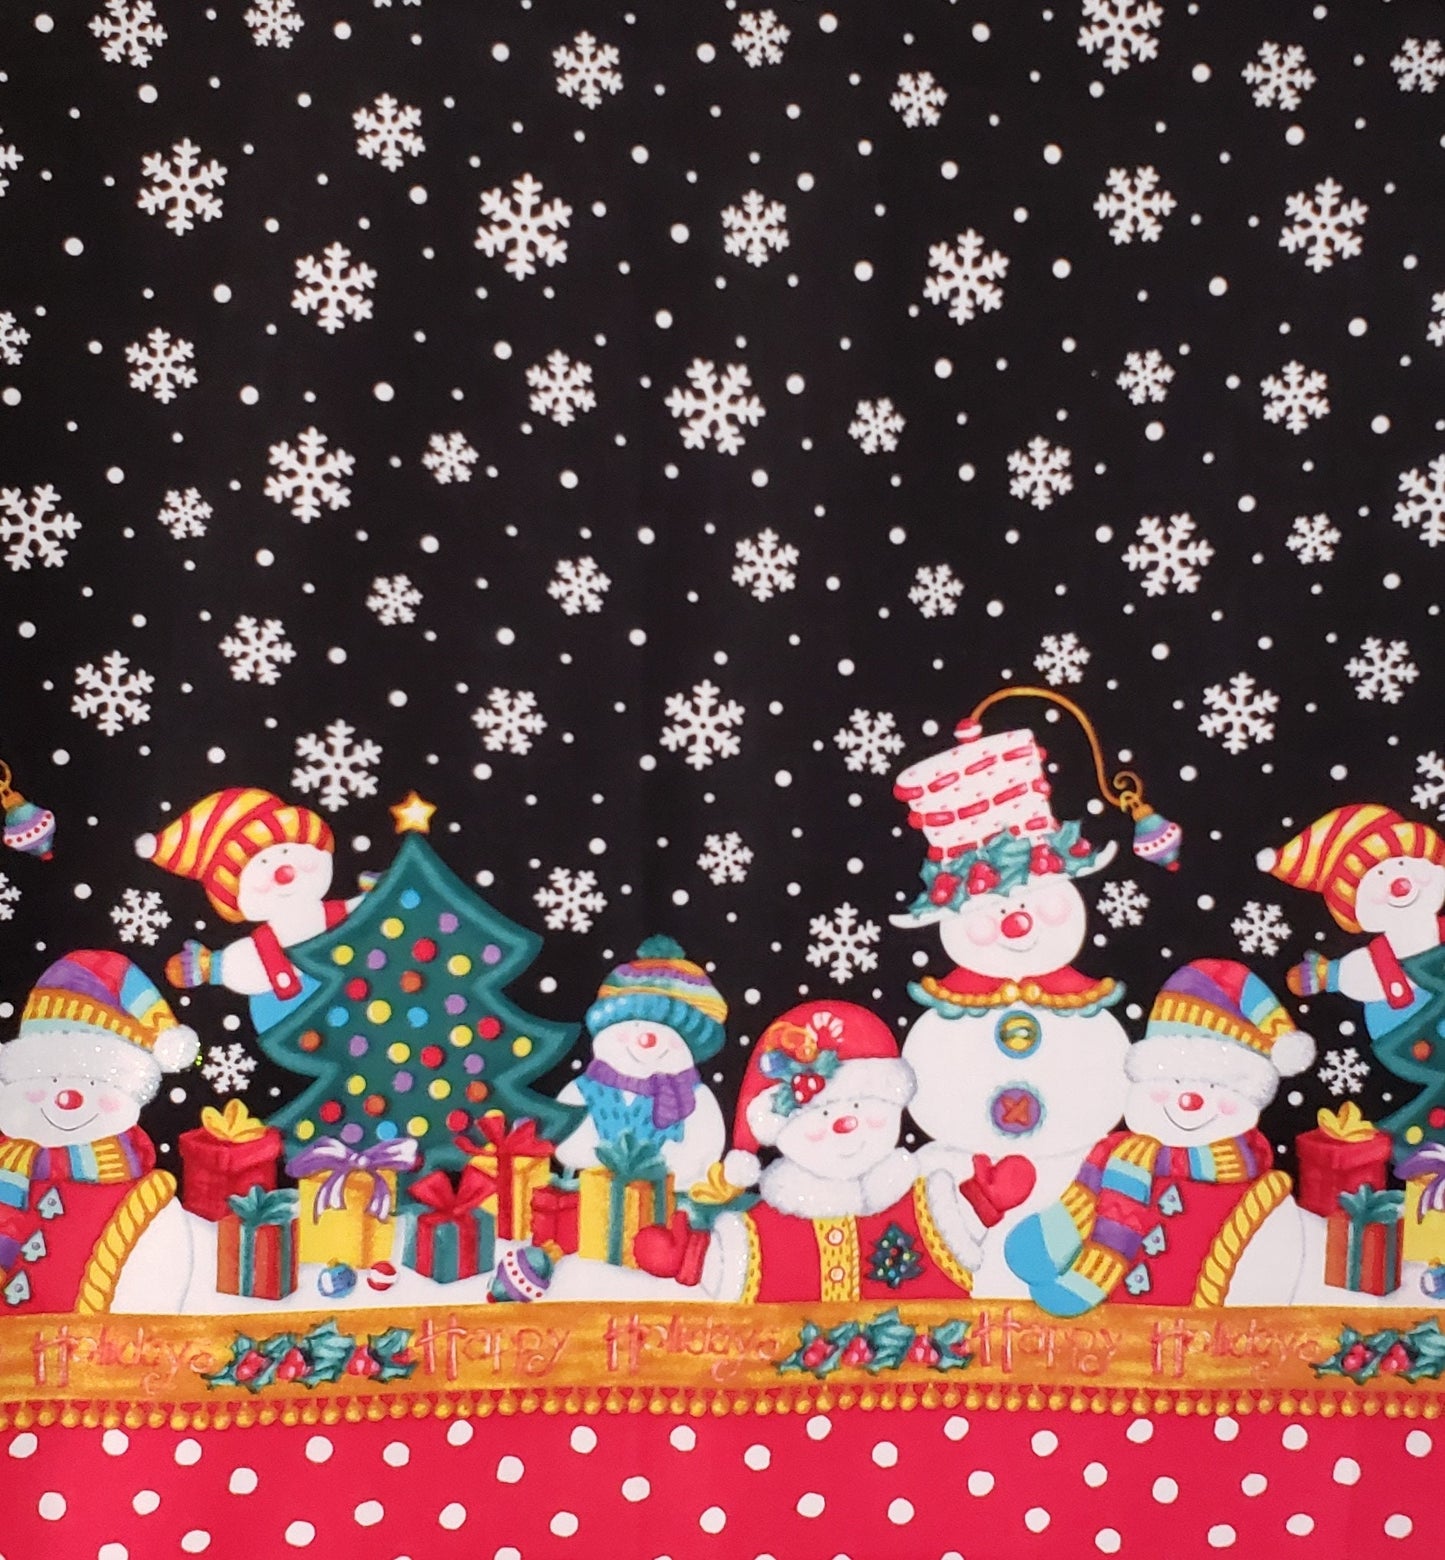 Kimberly Montgomery for MBT - Happy Holidays Double Border Print With Snow People - Some Glitter Accents on Hats